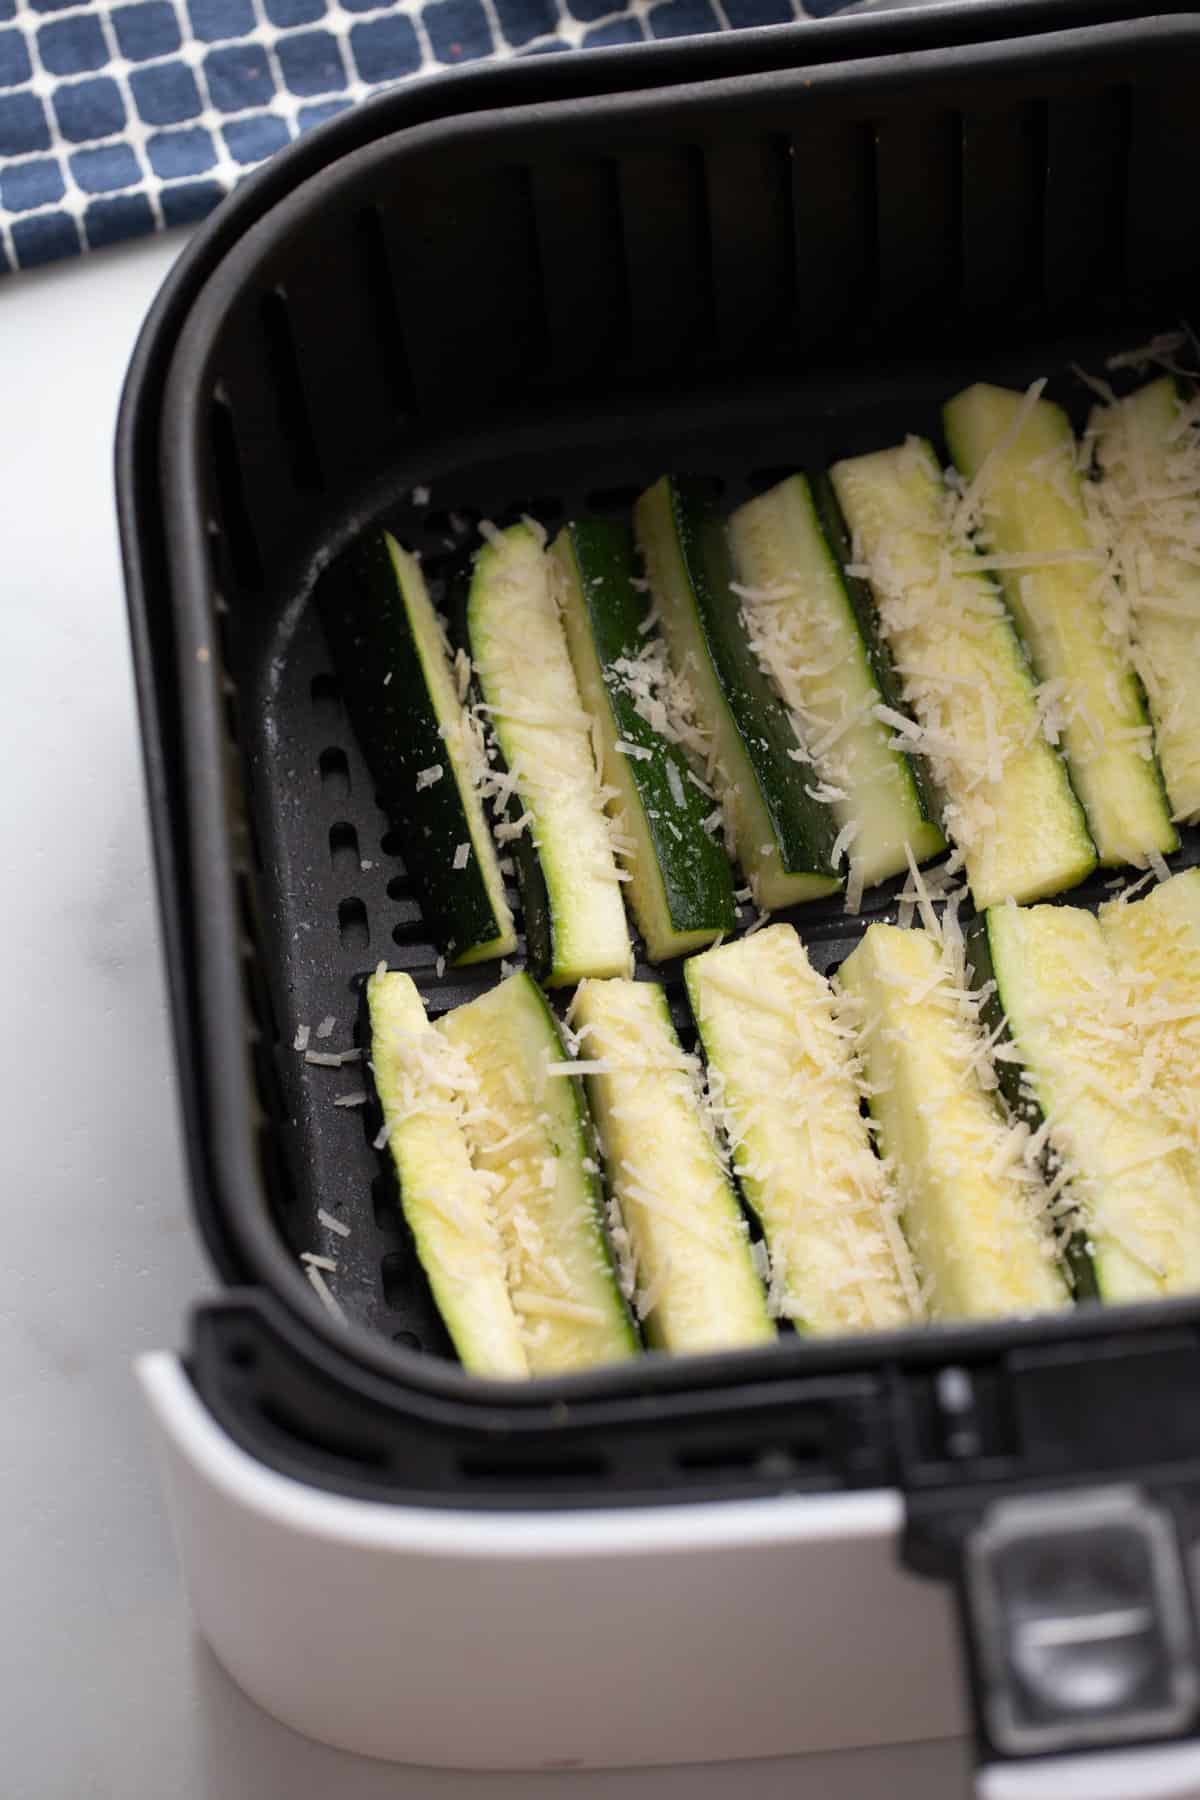 Sliced zucchini arranged in one layer inside of an air fryer basket and topped with shredded parmesan cheese